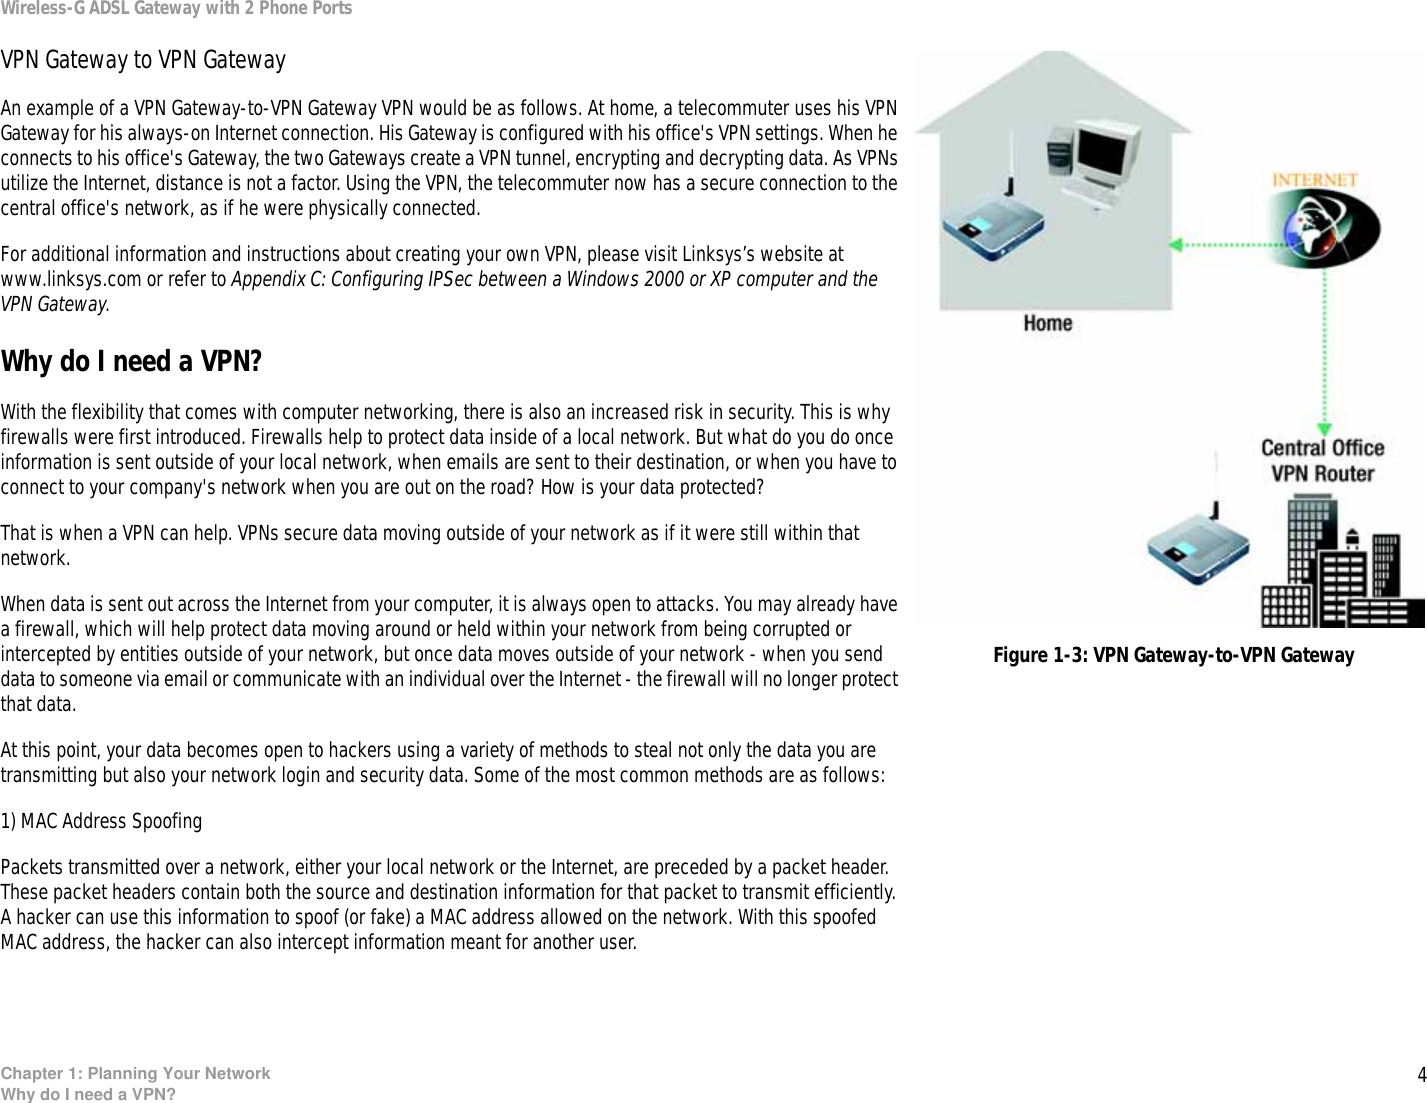 4Chapter 1: Planning Your NetworkWhy do I need a VPN?Wireless-G ADSL Gateway with 2 Phone PortsVPN Gateway to VPN GatewayAn example of a VPN Gateway-to-VPN Gateway VPN would be as follows. At home, a telecommuter uses his VPN Gateway for his always-on Internet connection. His Gateway is configured with his office&apos;s VPN settings. When he connects to his office&apos;s Gateway, the two Gateways create a VPN tunnel, encrypting and decrypting data. As VPNs utilize the Internet, distance is not a factor. Using the VPN, the telecommuter now has a secure connection to the central office&apos;s network, as if he were physically connected. For additional information and instructions about creating your own VPN, please visit Linksys’s website at www.linksys.com or refer to Appendix C: Configuring IPSec between a Windows 2000 or XP computer and the VPN Gateway.Why do I need a VPN?With the flexibility that comes with computer networking, there is also an increased risk in security. This is why firewalls were first introduced. Firewalls help to protect data inside of a local network. But what do you do once information is sent outside of your local network, when emails are sent to their destination, or when you have to connect to your company&apos;s network when you are out on the road? How is your data protected?That is when a VPN can help. VPNs secure data moving outside of your network as if it were still within that network.When data is sent out across the Internet from your computer, it is always open to attacks. You may already have a firewall, which will help protect data moving around or held within your network from being corrupted or intercepted by entities outside of your network, but once data moves outside of your network - when you send data to someone via email or communicate with an individual over the Internet - the firewall will no longer protect that data. At this point, your data becomes open to hackers using a variety of methods to steal not only the data you are transmitting but also your network login and security data. Some of the most common methods are as follows:1) MAC Address SpoofingPackets transmitted over a network, either your local network or the Internet, are preceded by a packet header. These packet headers contain both the source and destination information for that packet to transmit efficiently. A hacker can use this information to spoof (or fake) a MAC address allowed on the network. With this spoofed MAC address, the hacker can also intercept information meant for another user.Figure 1-3: VPN Gateway-to-VPN Gateway